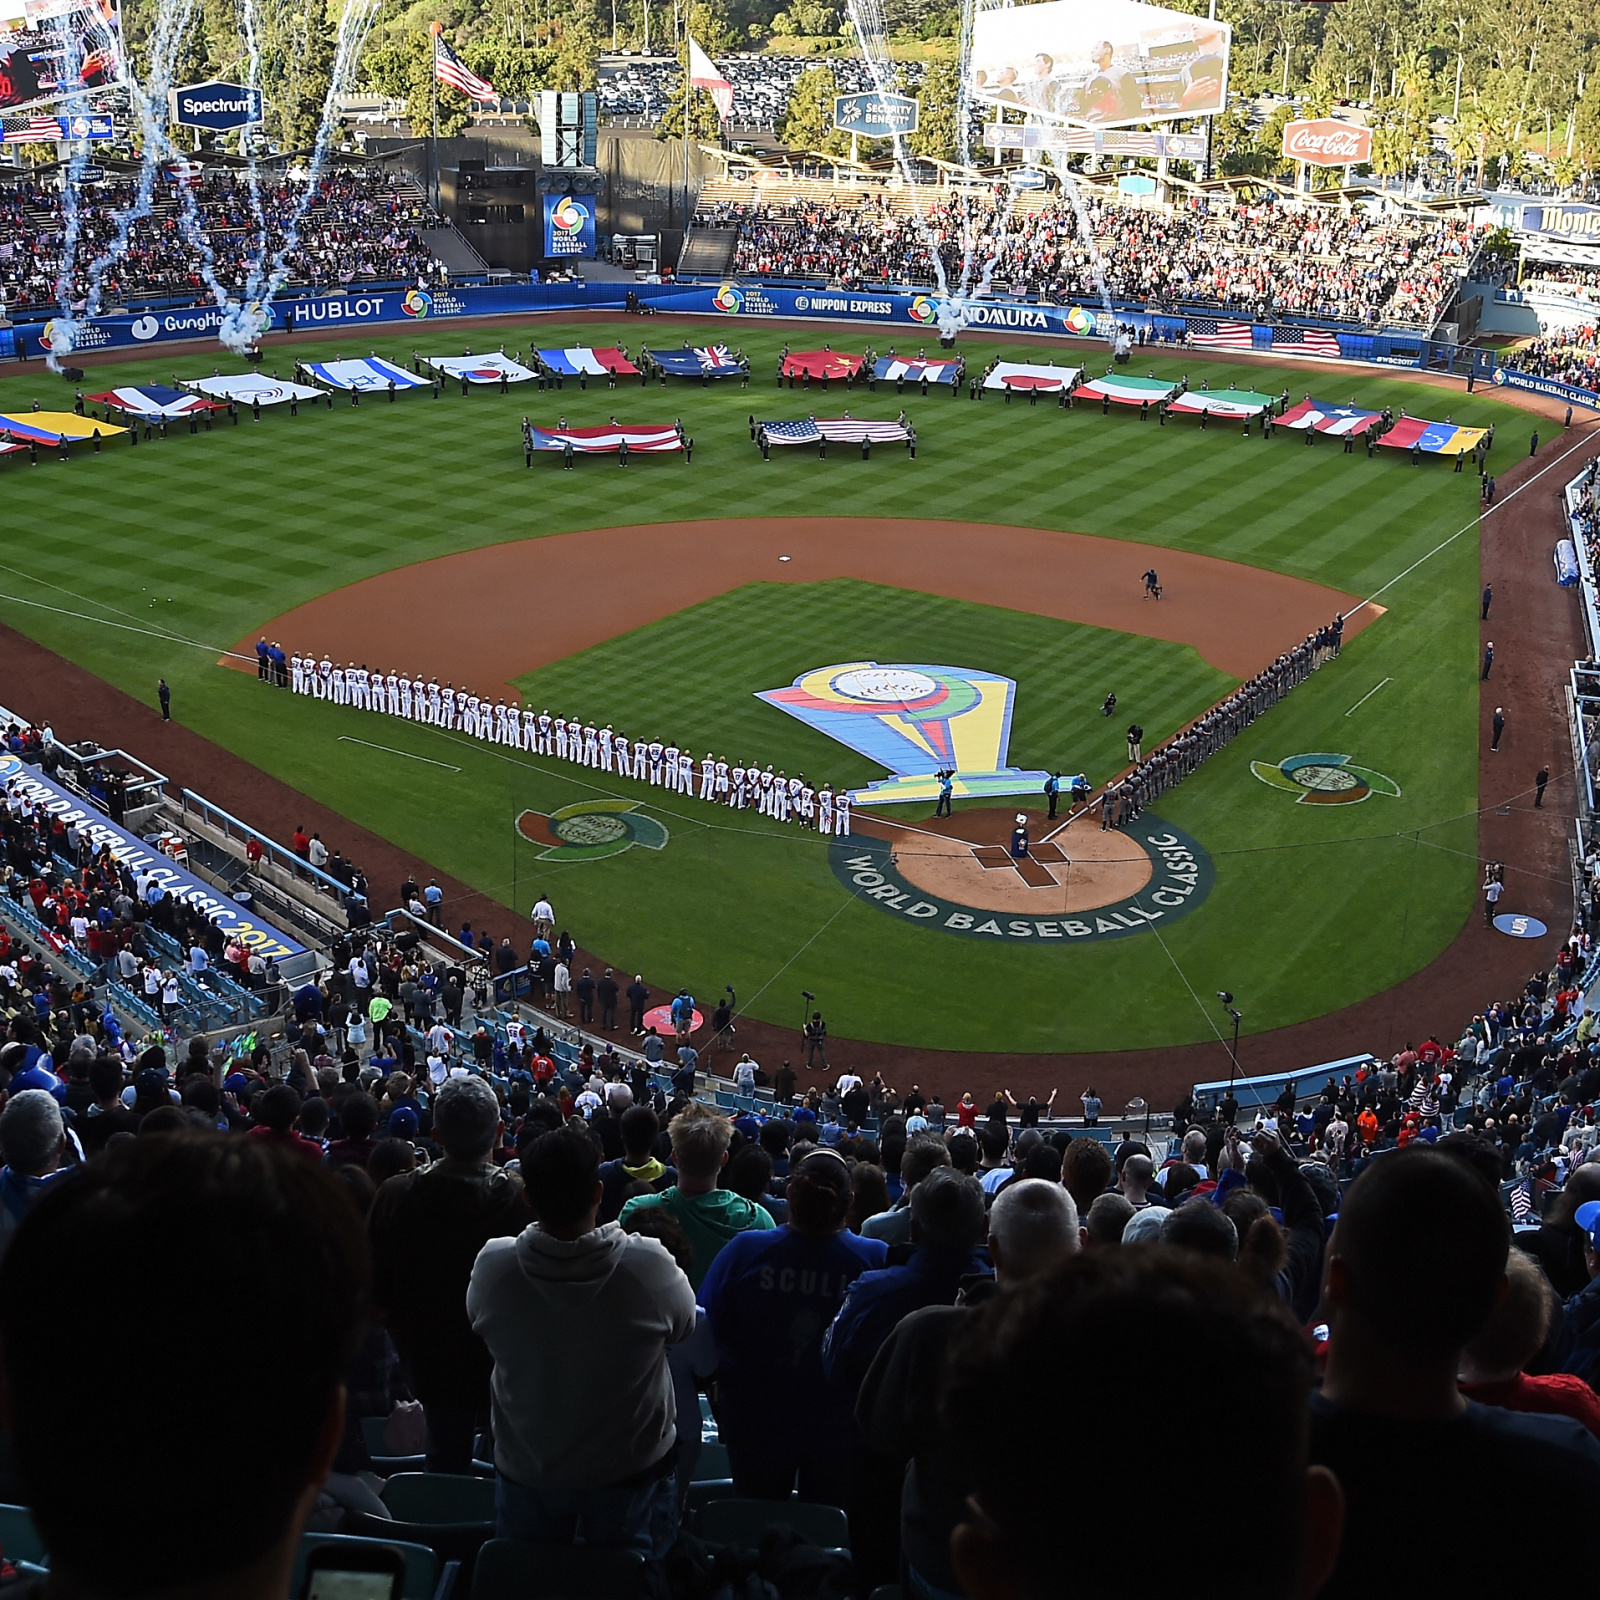 World Baseball Classic 2023 TV schedule: FREE live streams, times, TV  channels, dates for USA, Puerto Rico, Japan, more 